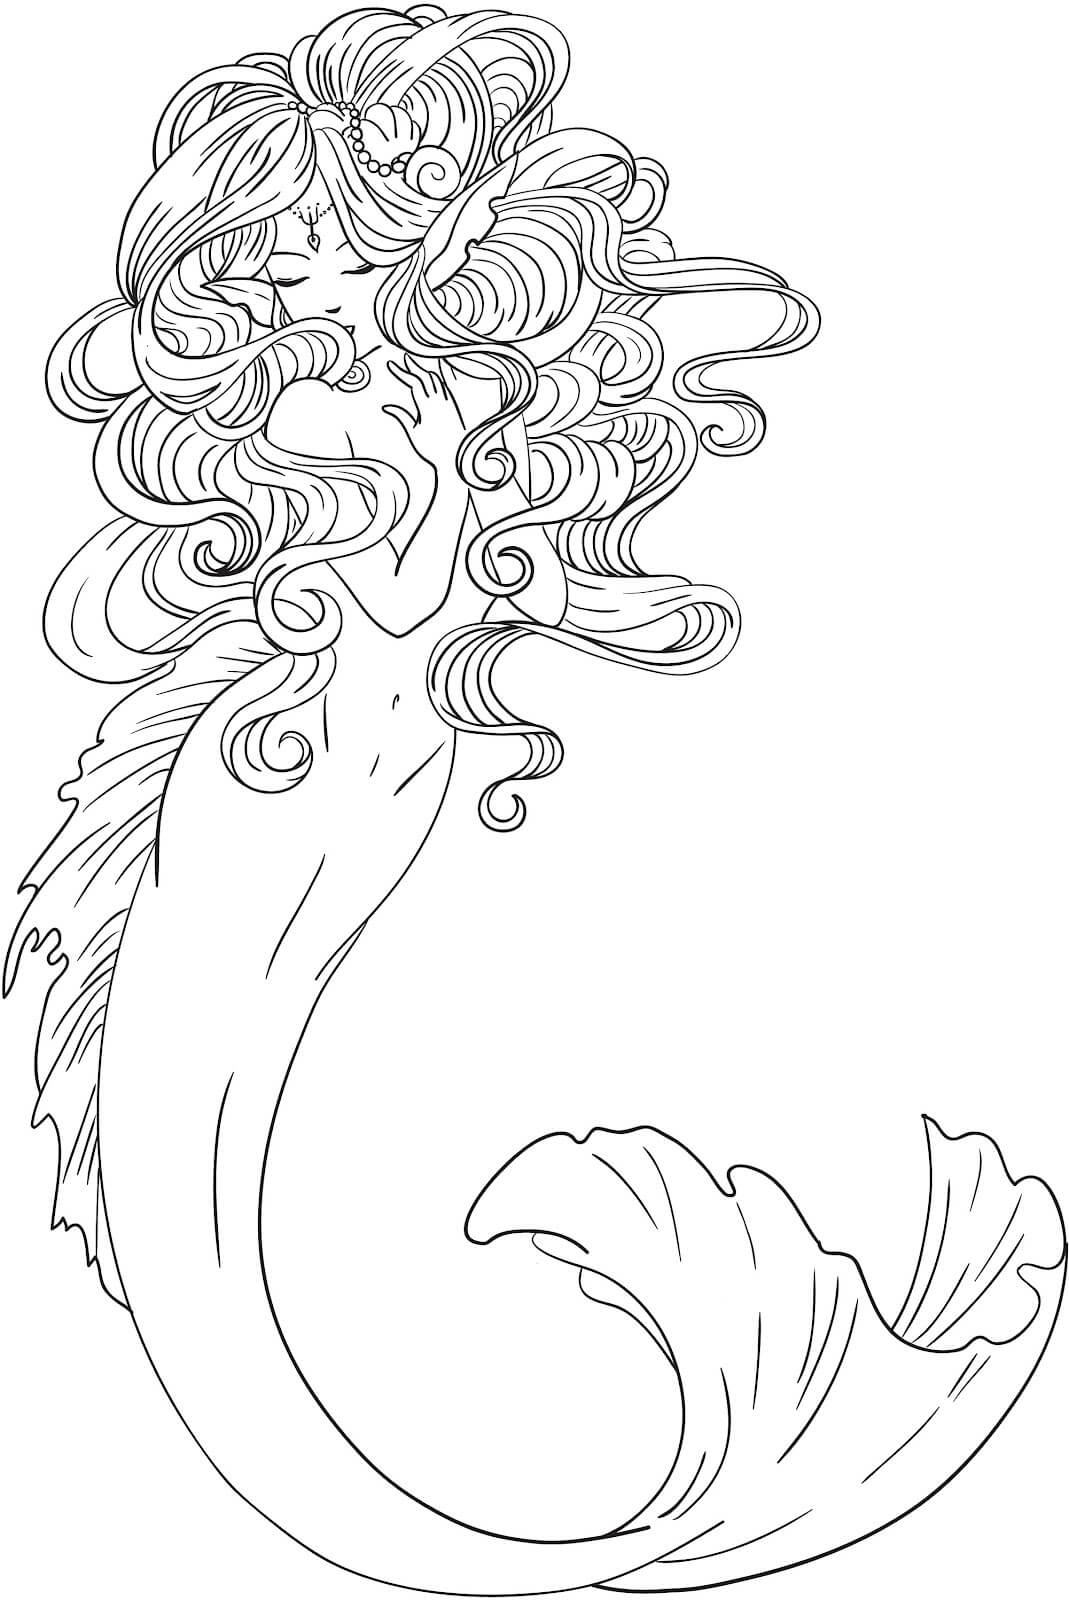 mermaid coloring pages for adults - Clip Art Library